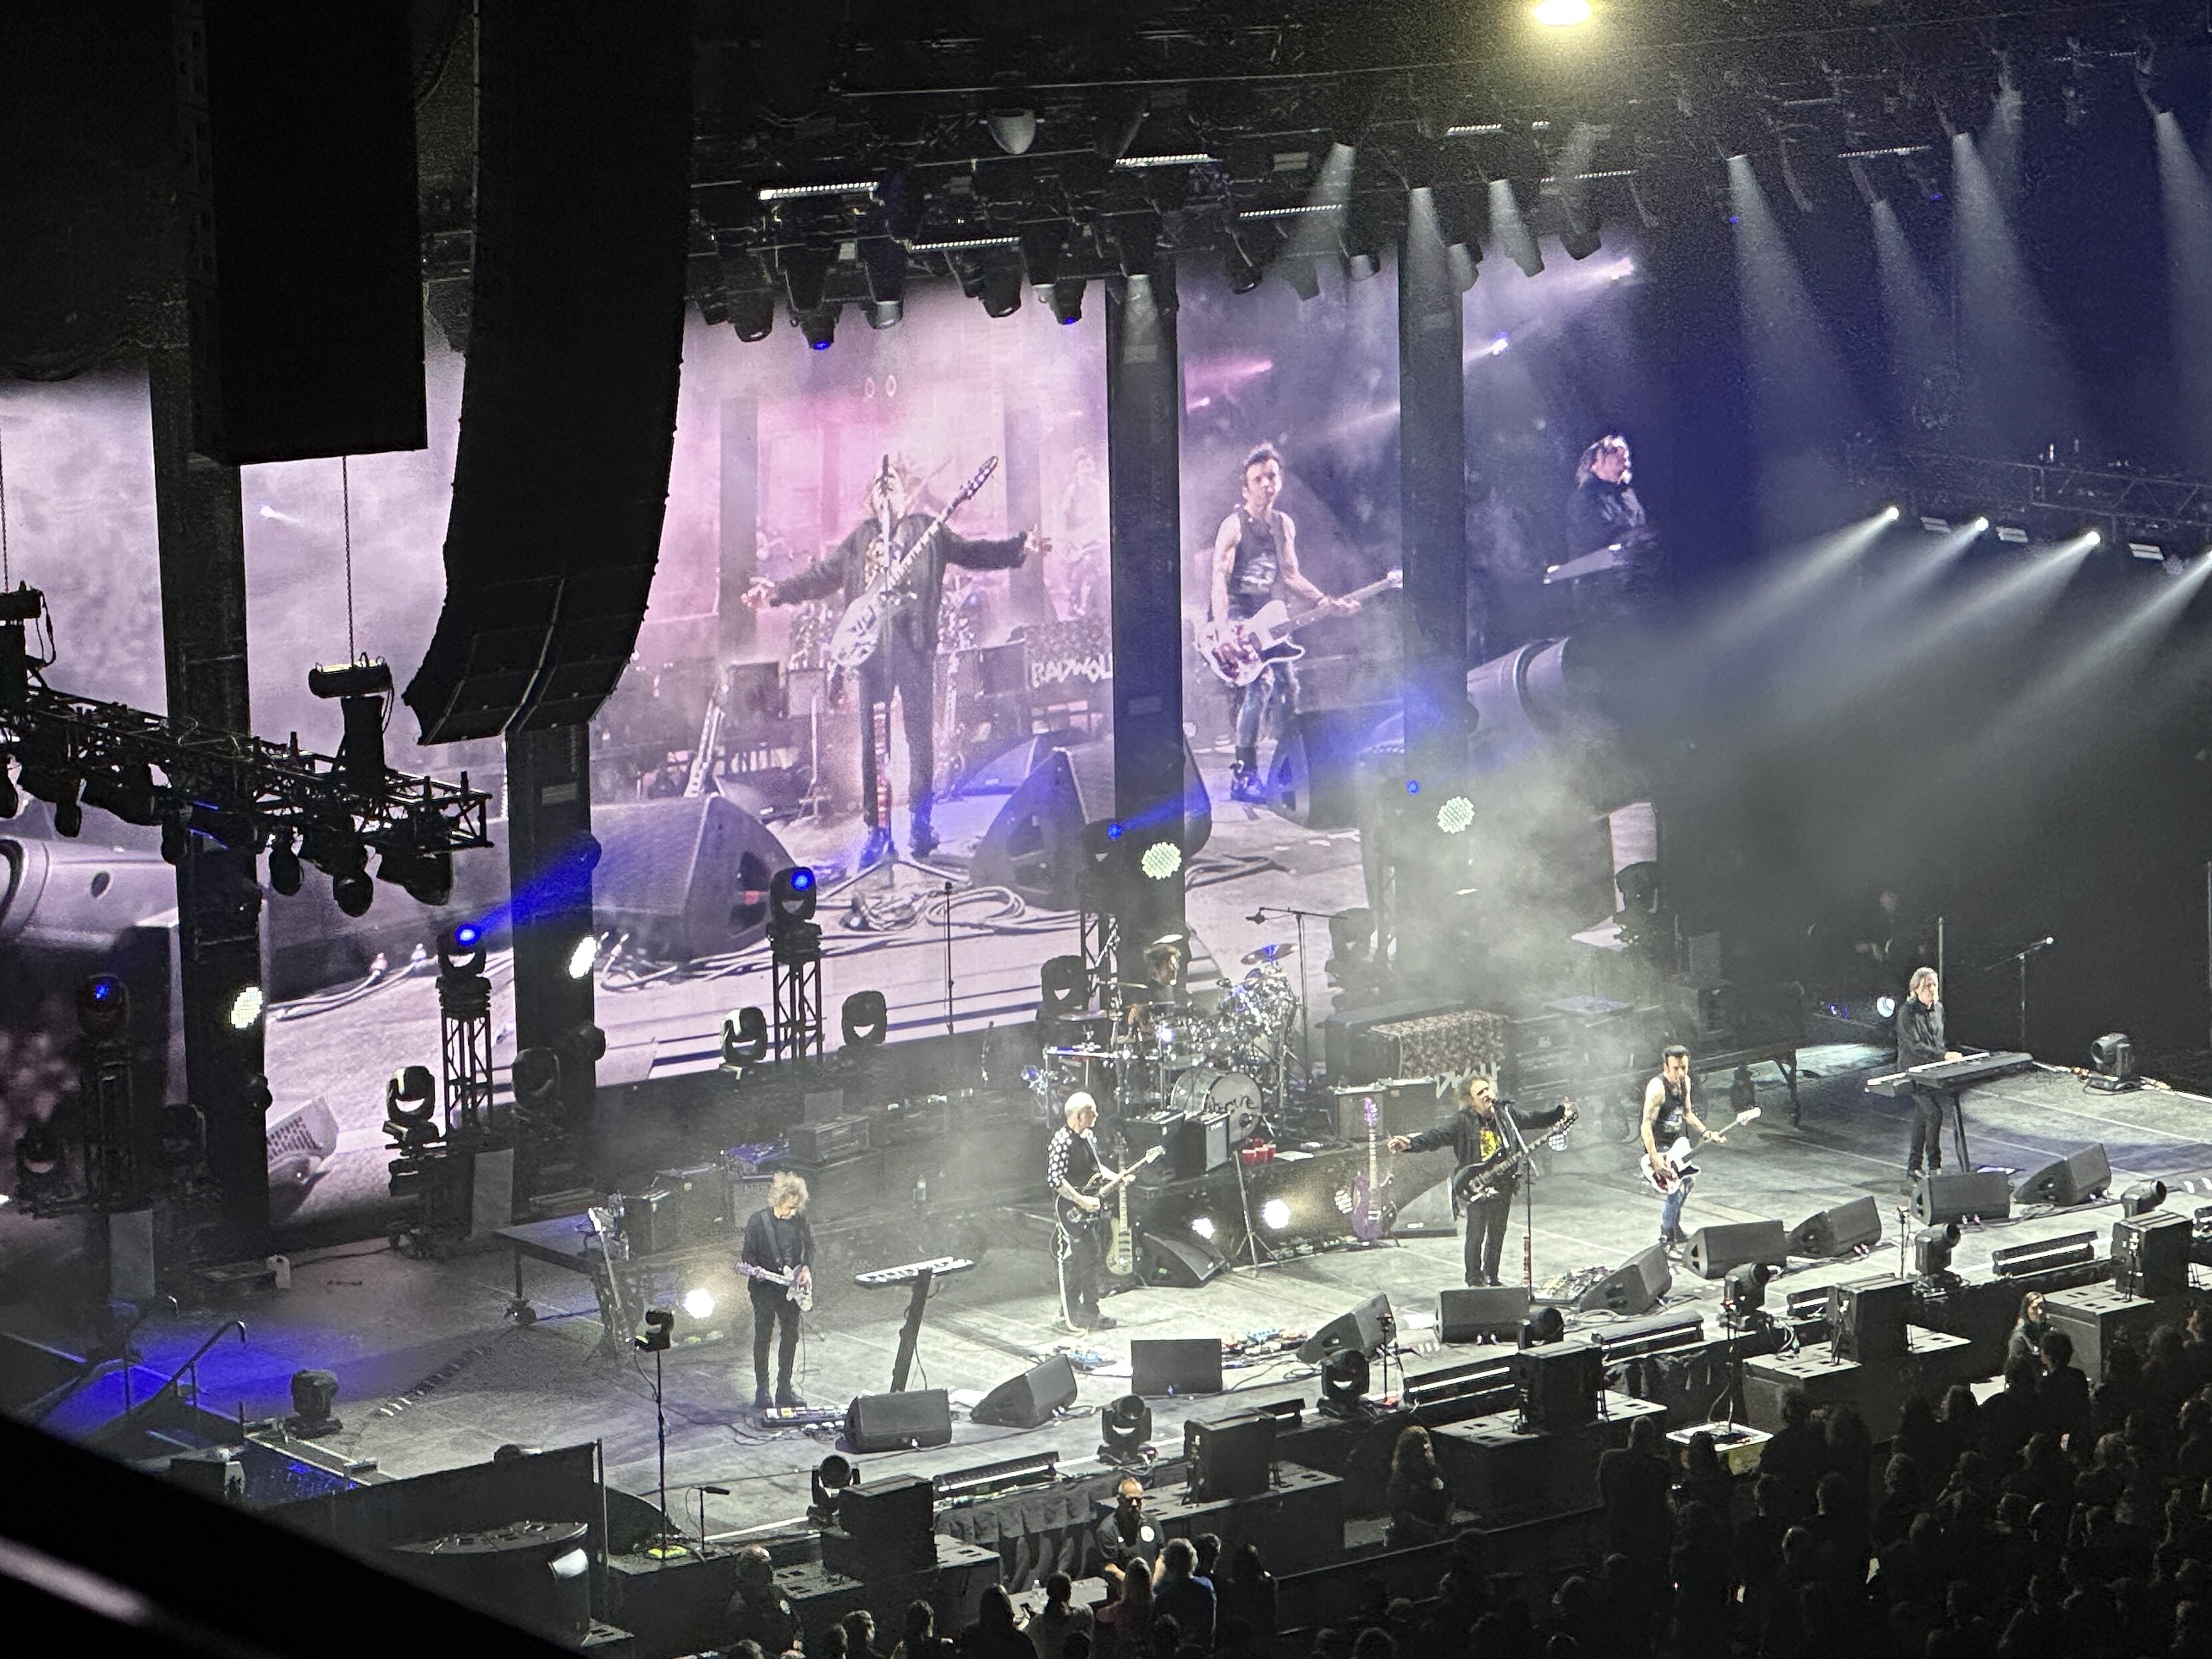 Shot of the stage from far away, with Robert Smith in the middle with arms outstreched and a giant video screen behind